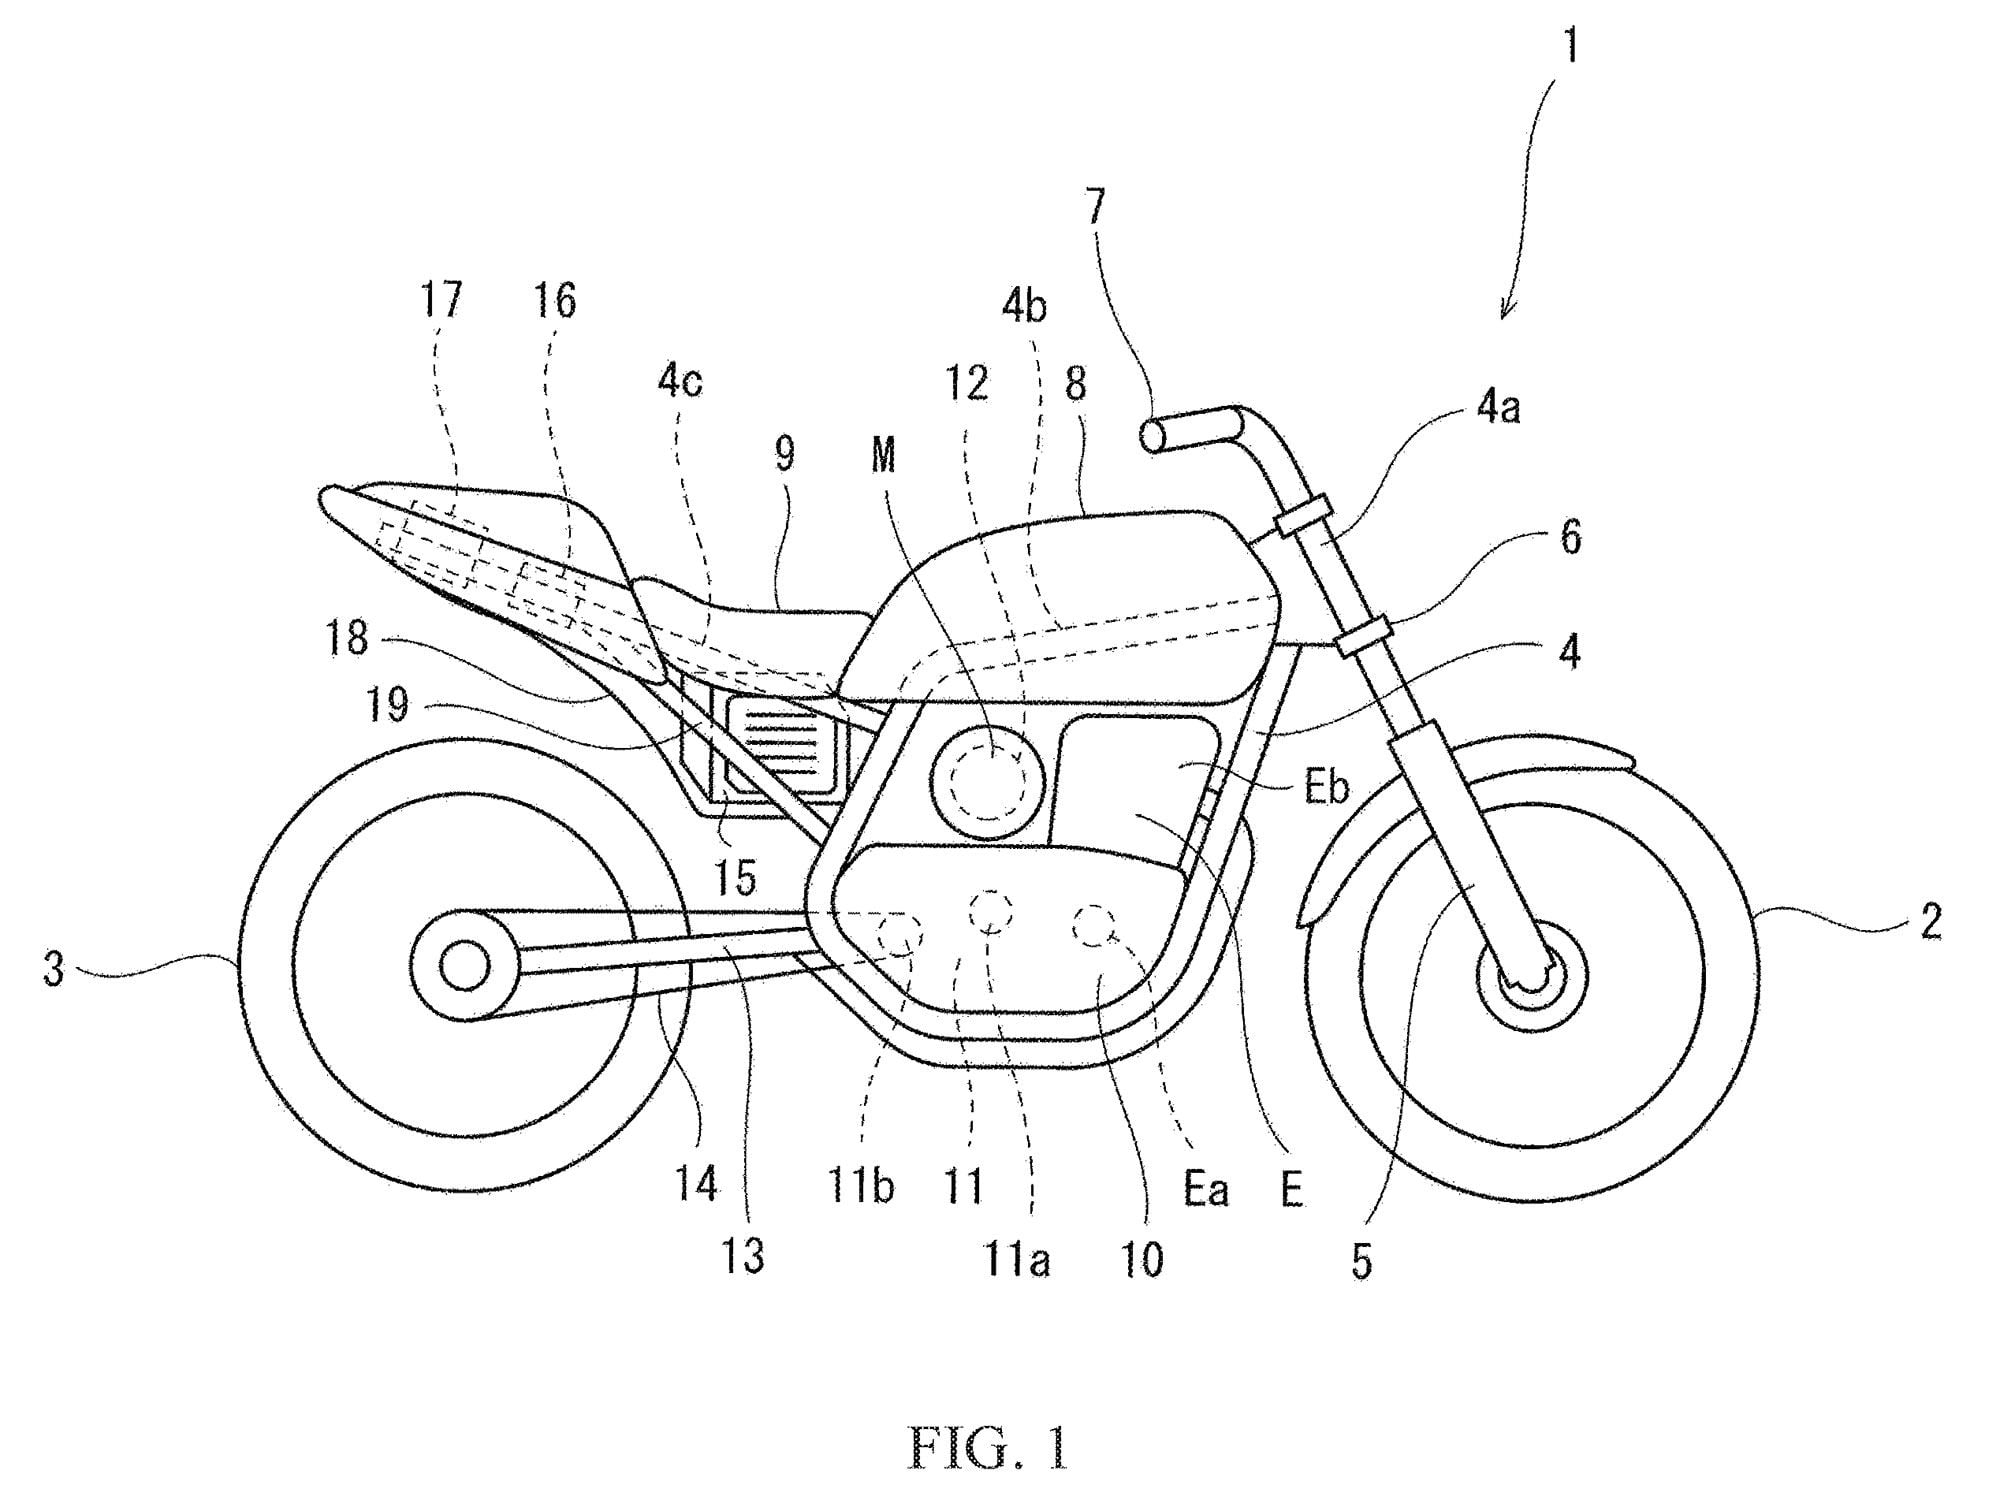 New patents show Kawasaki making strides on its hybrid motorcycle project.